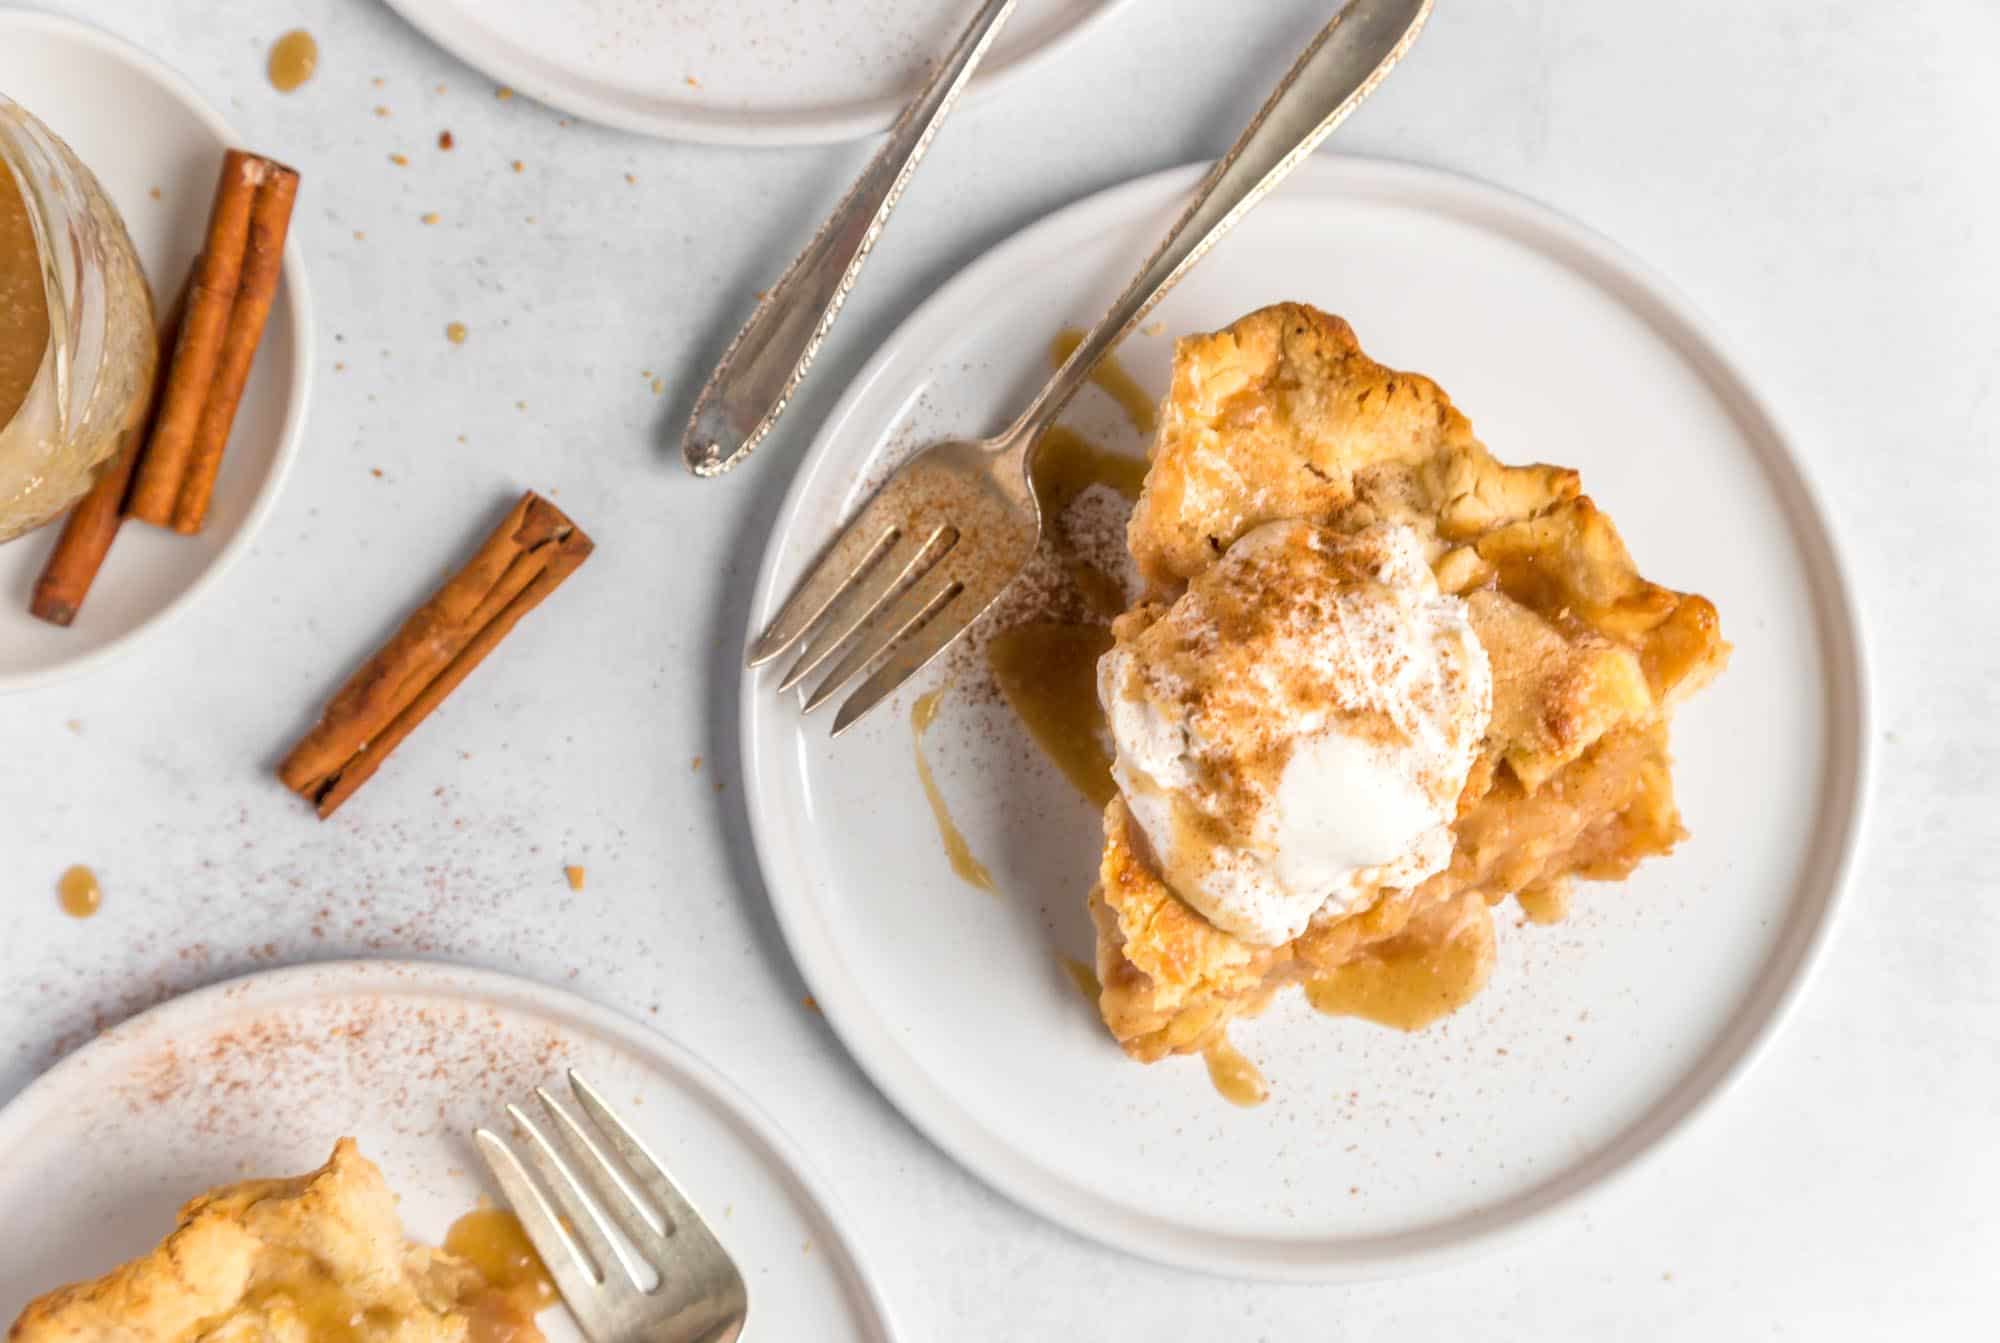 Best Vegan Apple Pie on a Plate With Vanilla Ice Cream And A Rustic Fork